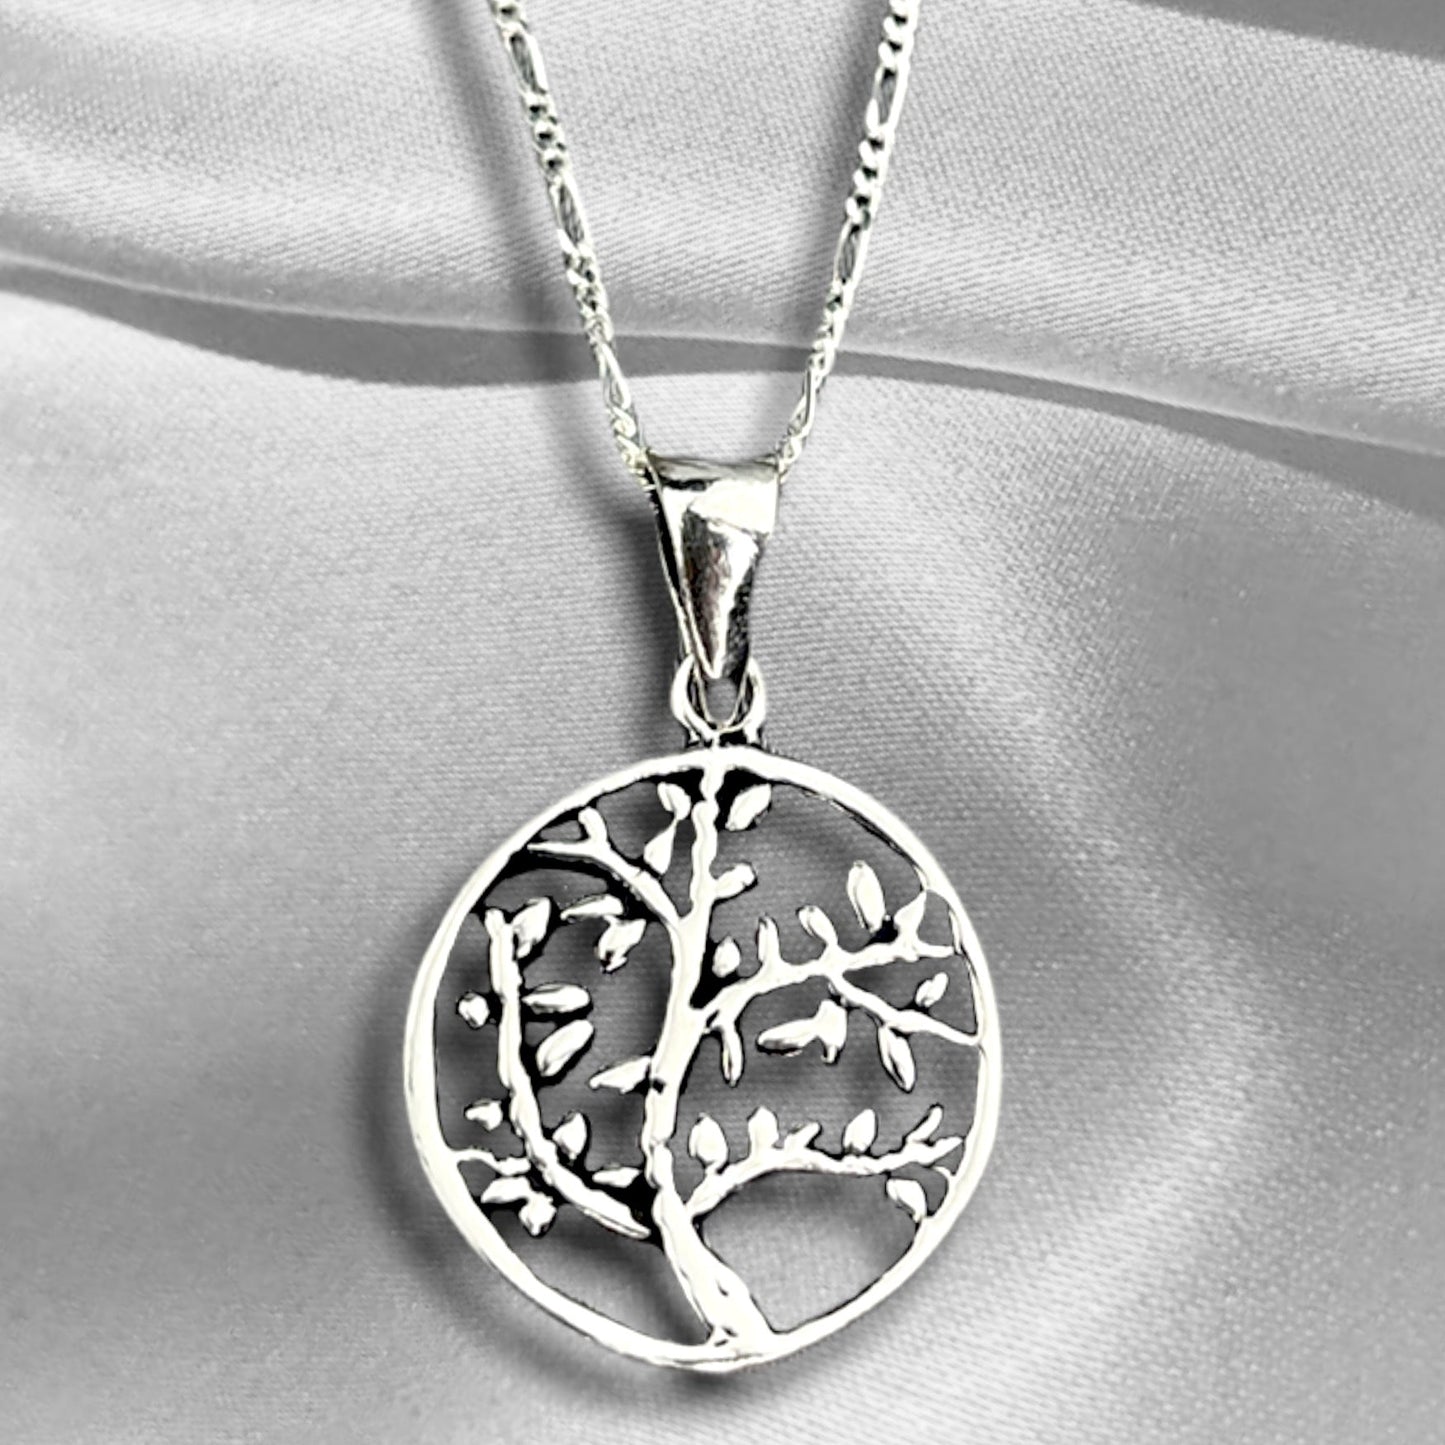 925 Sterling Silver Chain with Lifebaum - K925-92